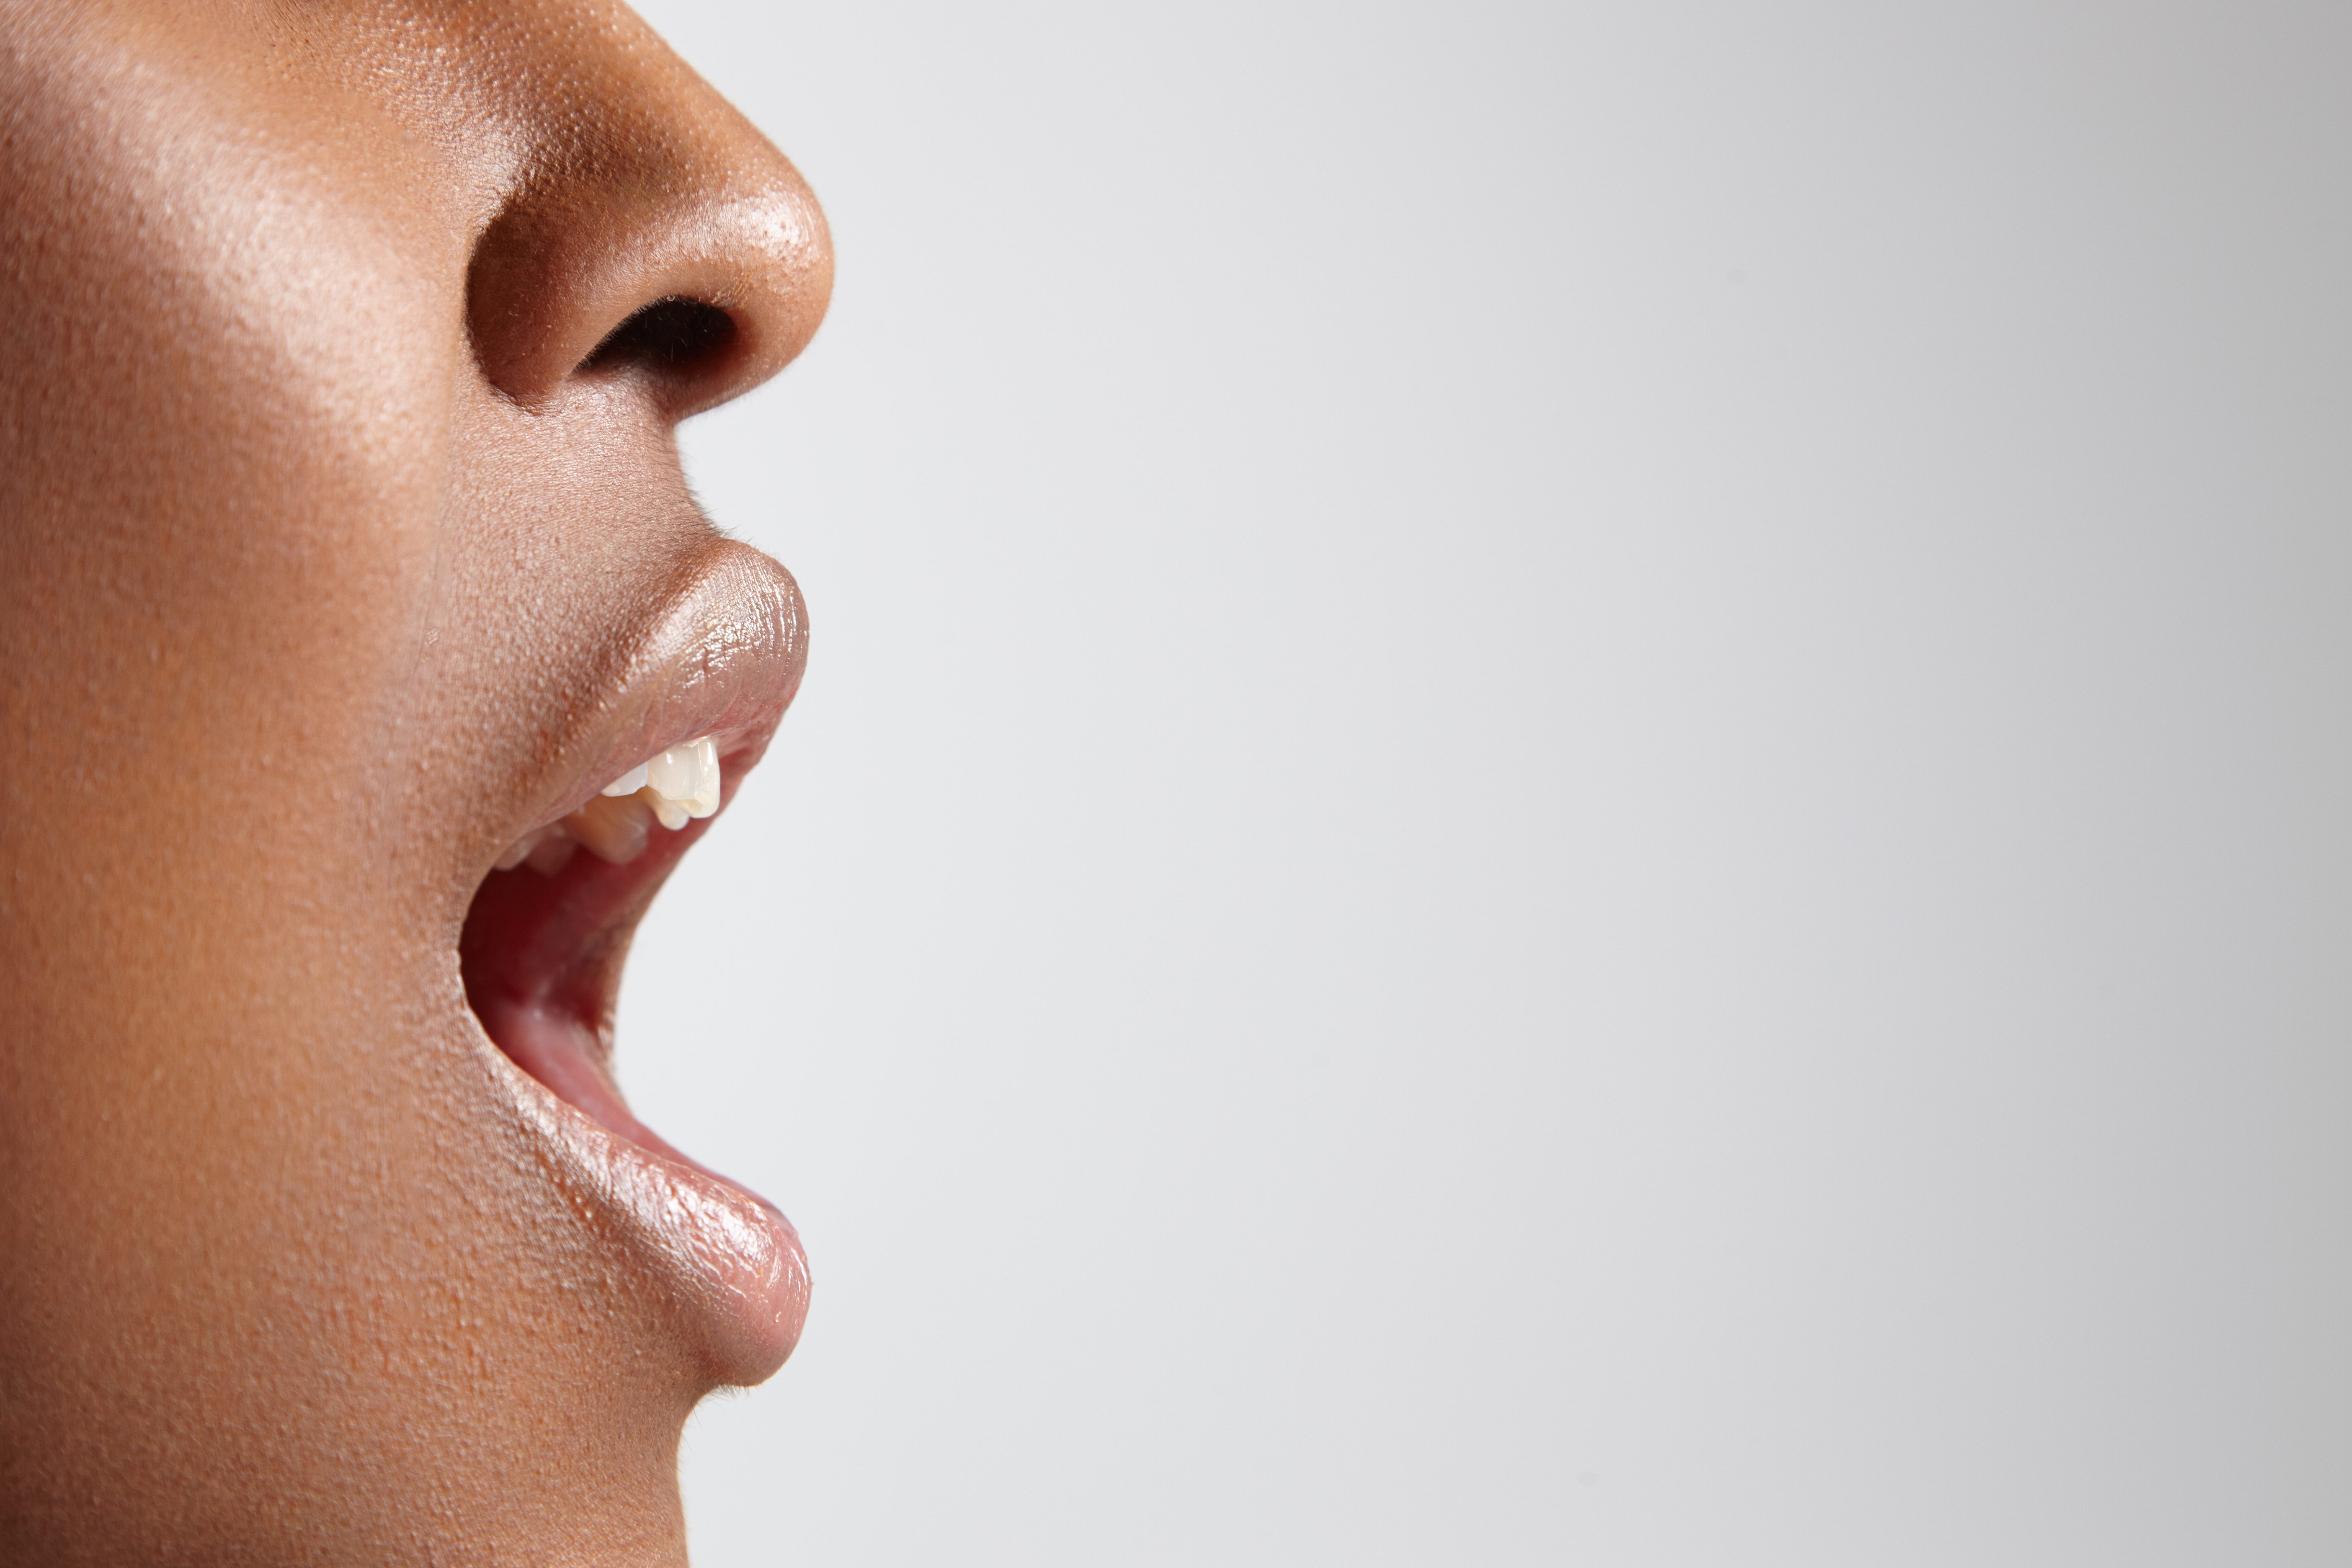 13 People You Didn't Know Overcame Stuttering